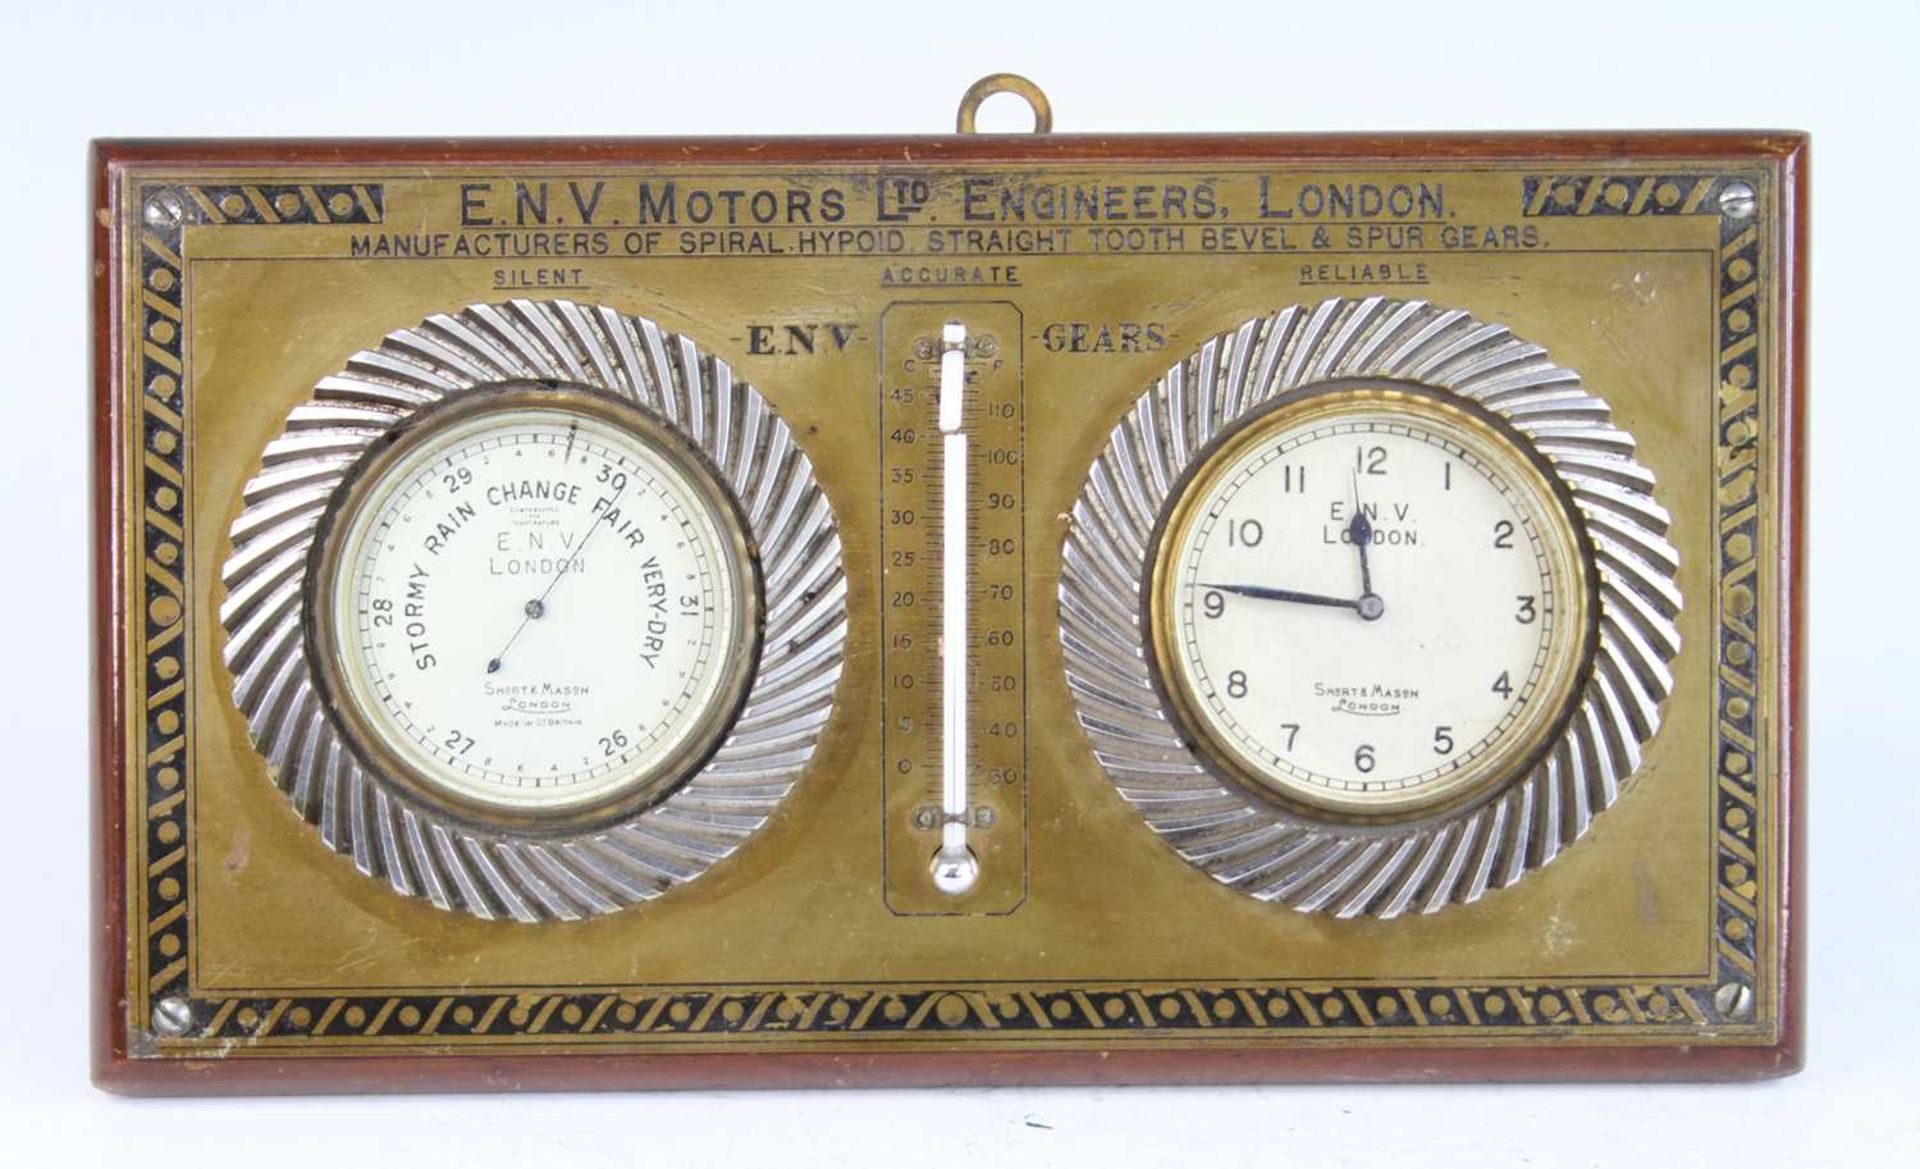 A car twin-dial clock barometer by E.N.V. Motors Ltd Engineers London, with mounted mercury scale (